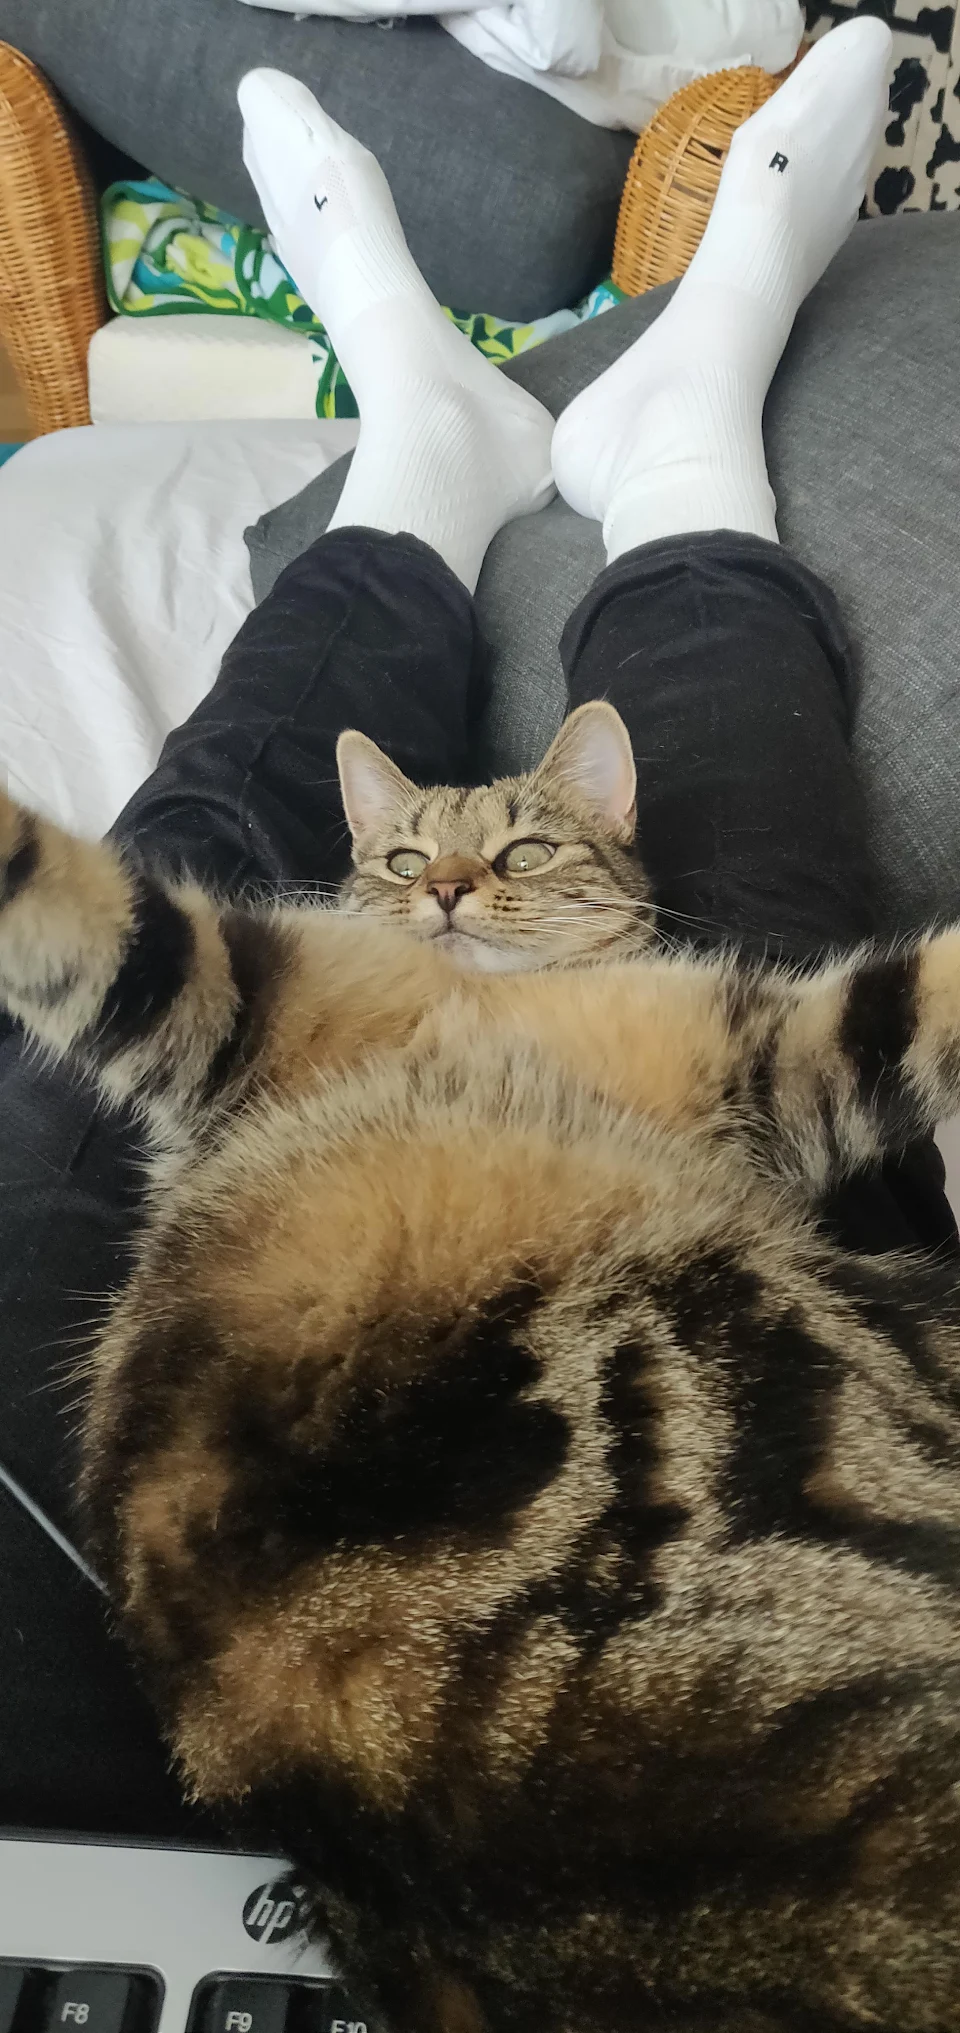 Maja just wants to relax and derp all day long